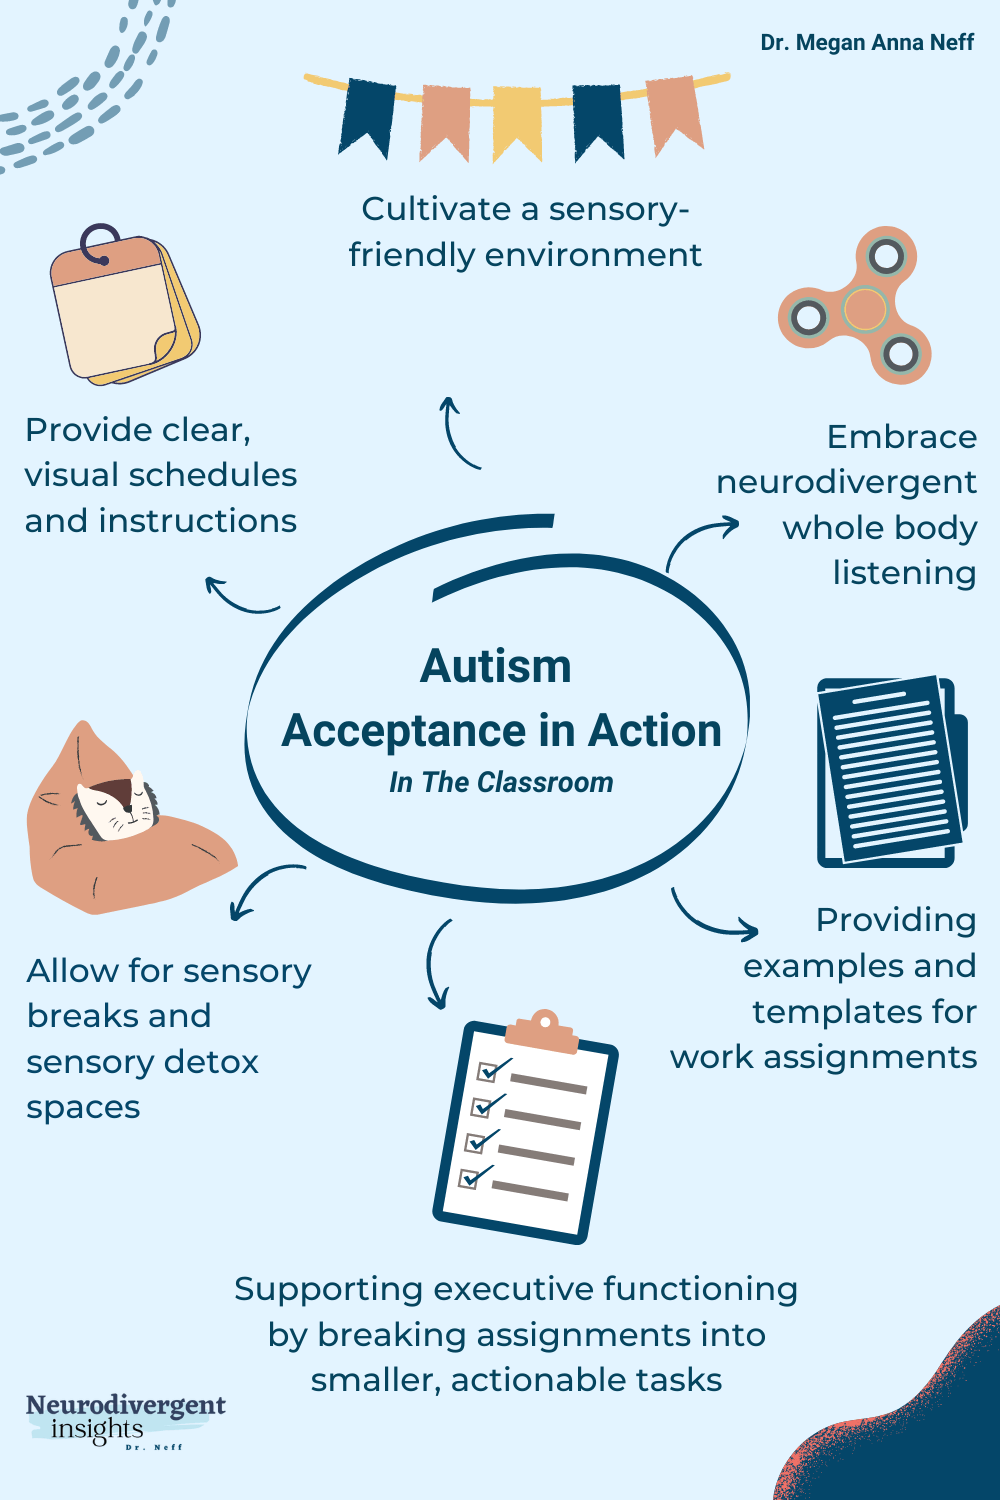 Autism awareness and autism acceptance in the classroom